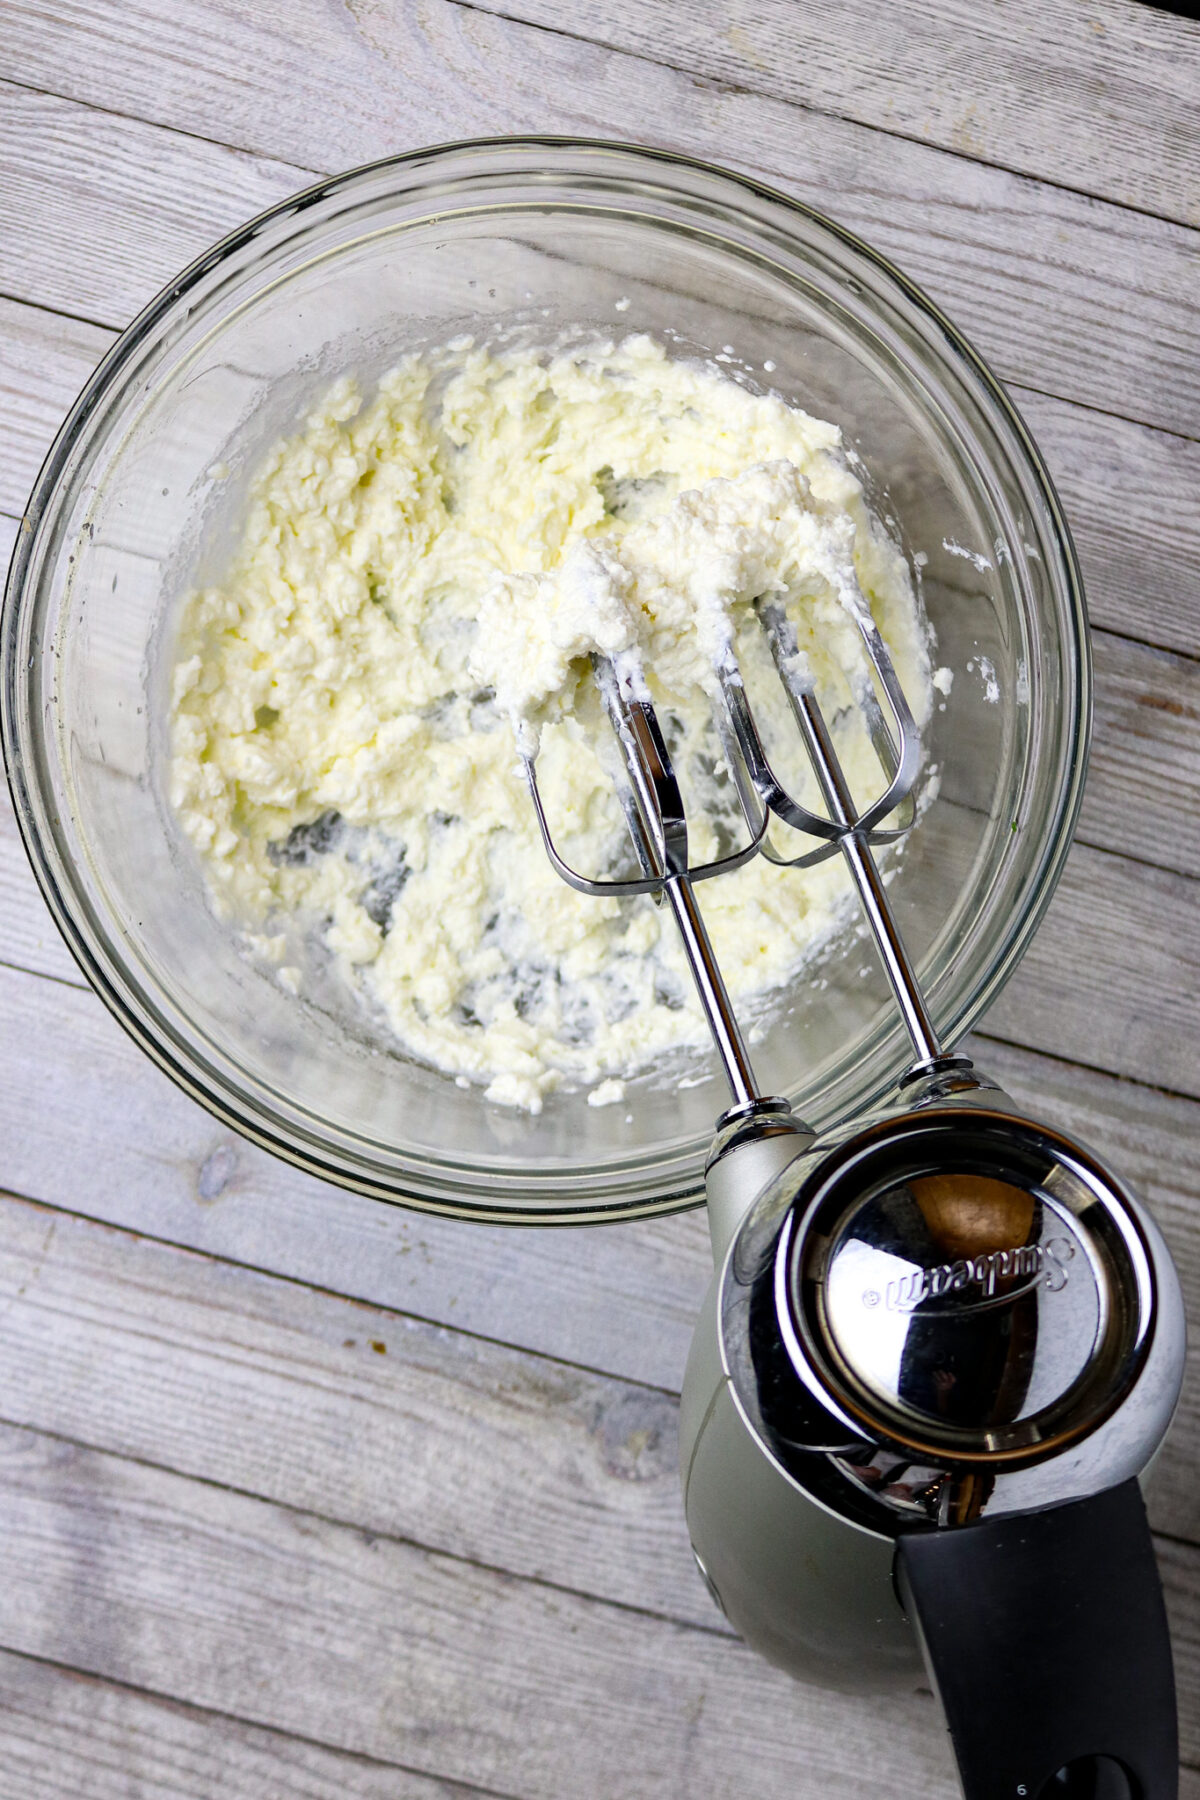 A mixer with beaters in a bowl of mixed cream cheese.